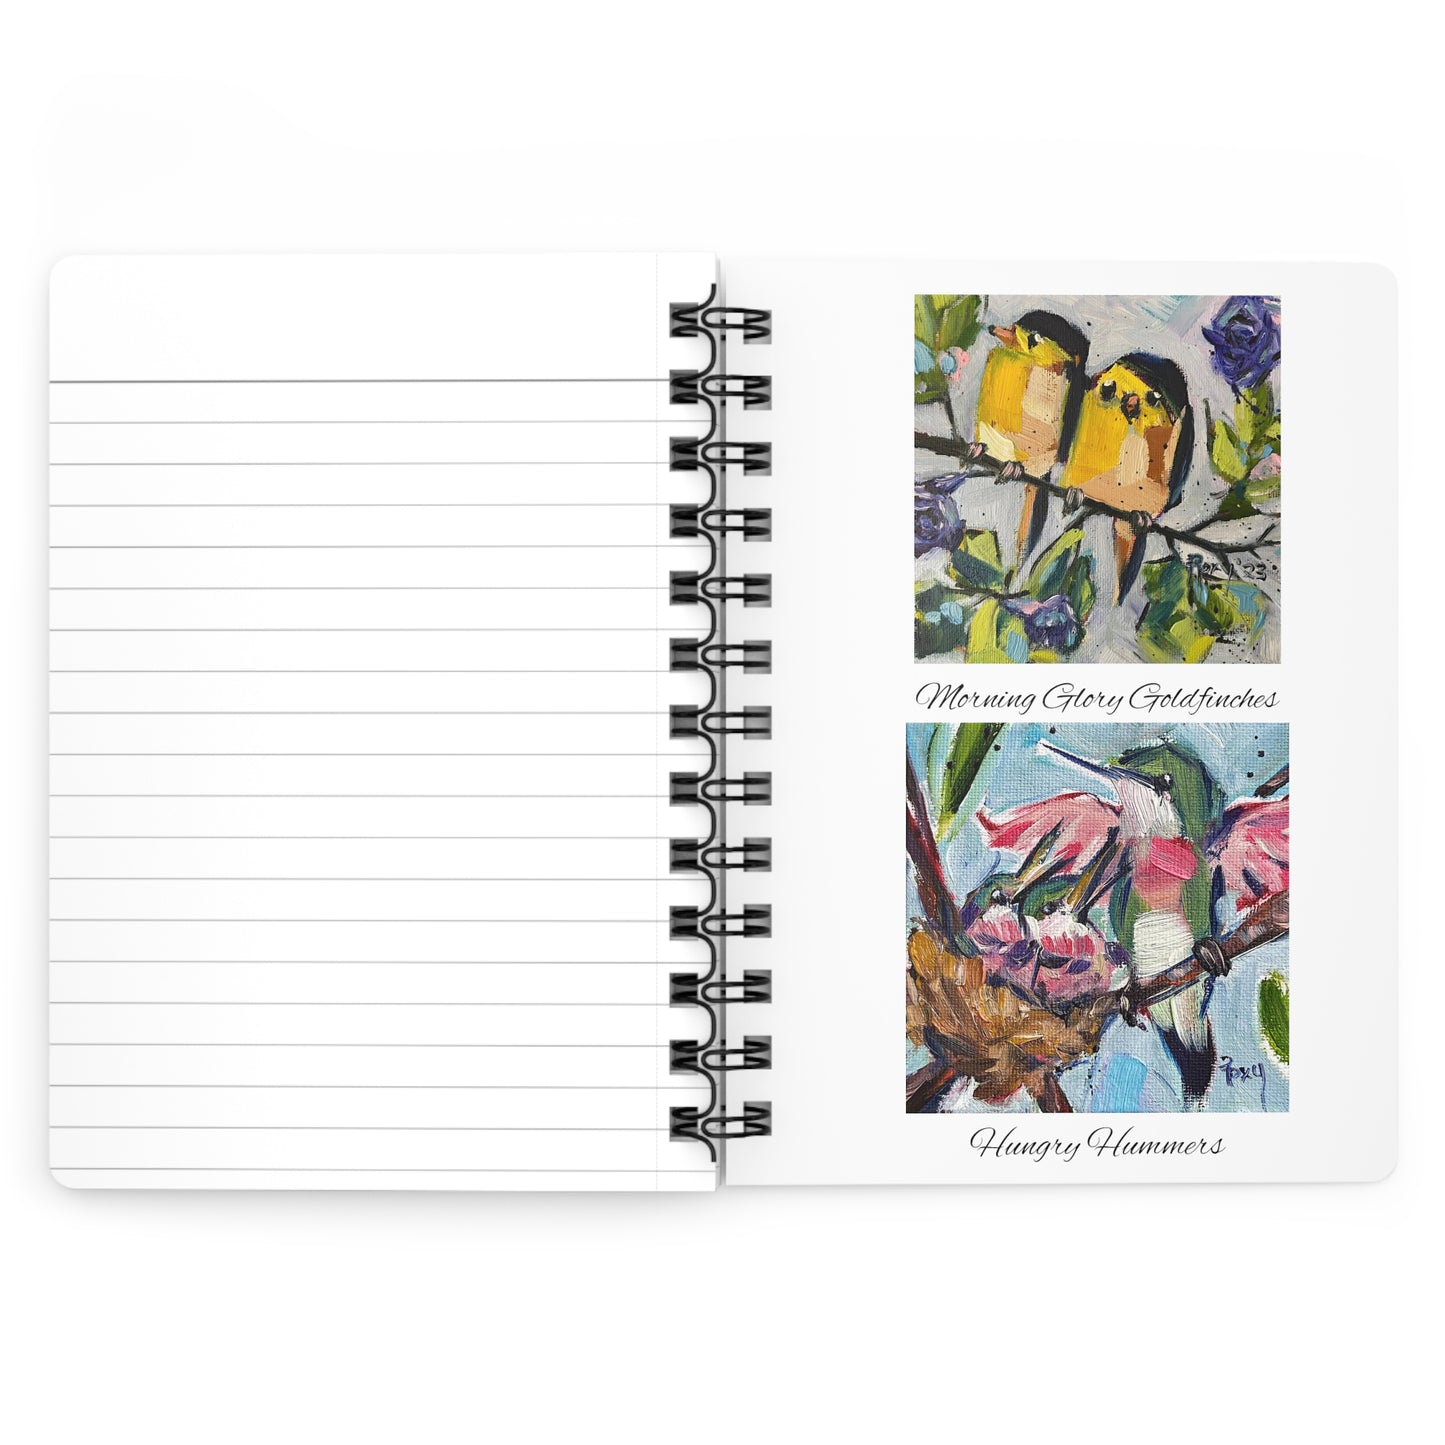 Birds-Six colorful Bird Paintings- Spiral Bound Journal